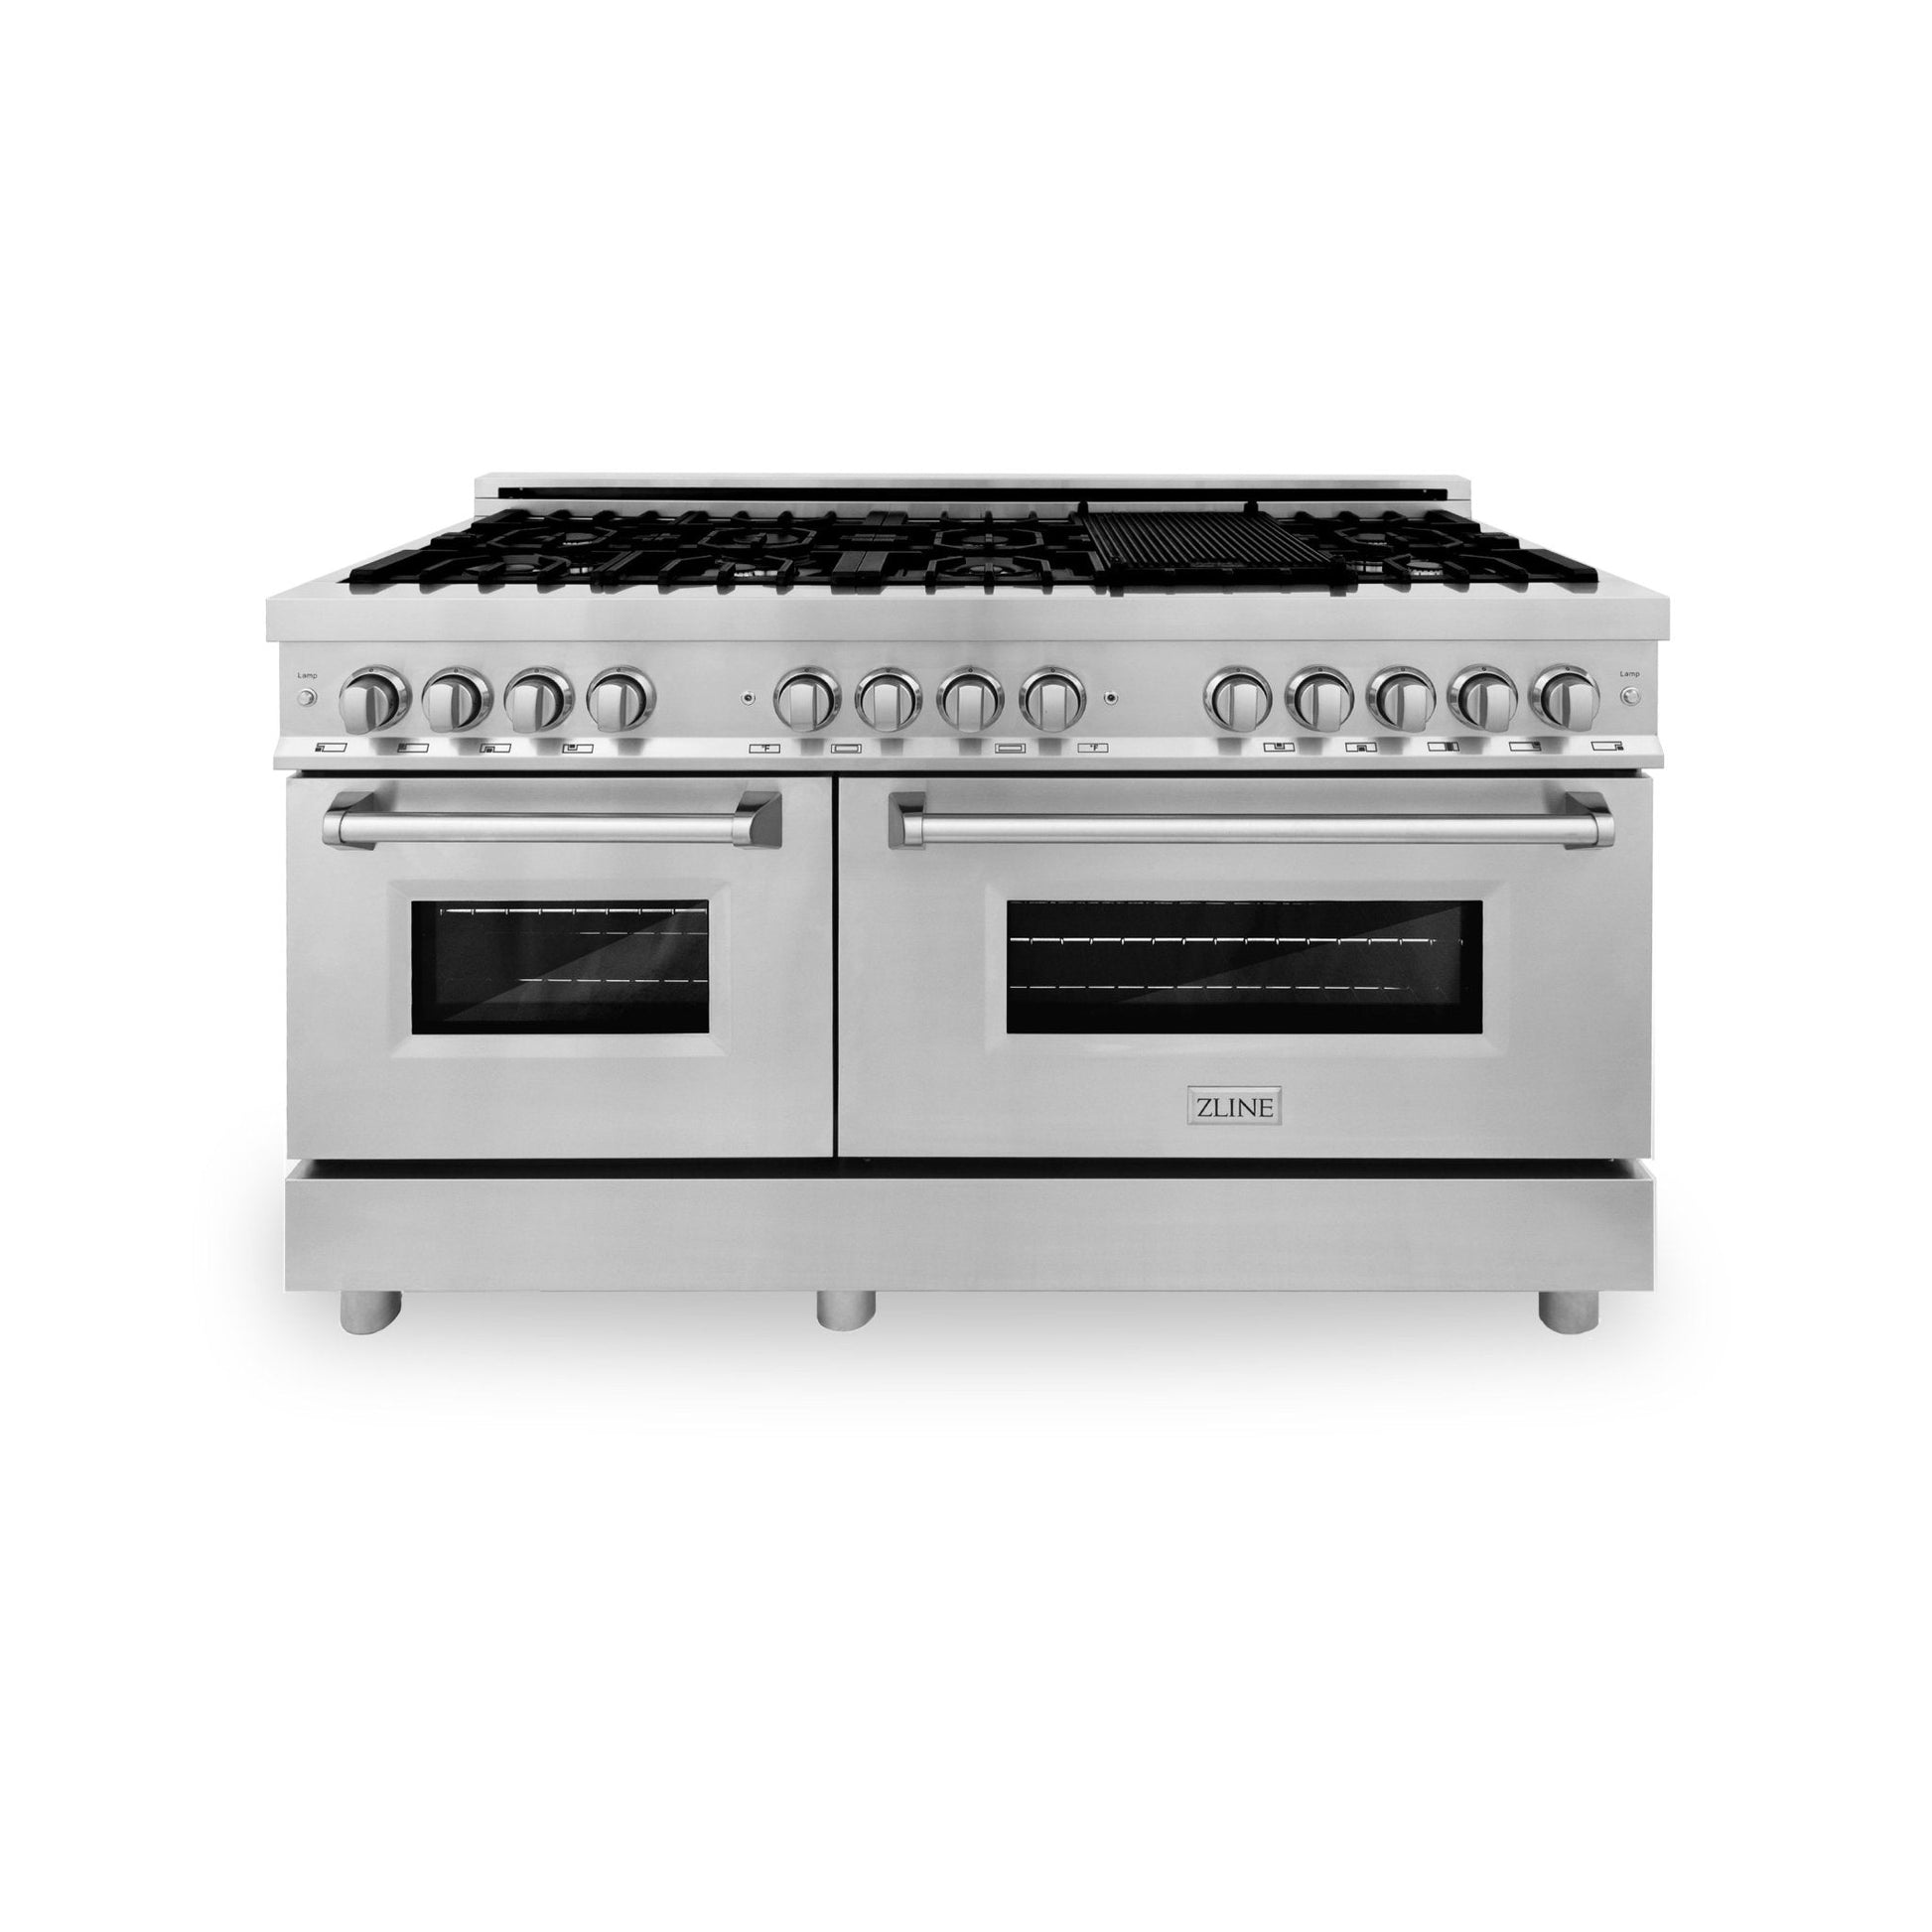 ZLINE 60 in. 7.4 cu. ft. Dual Fuel Range with Gas Stove and Electric Oven in Stainless Steel (RA60) front, ovens closed.